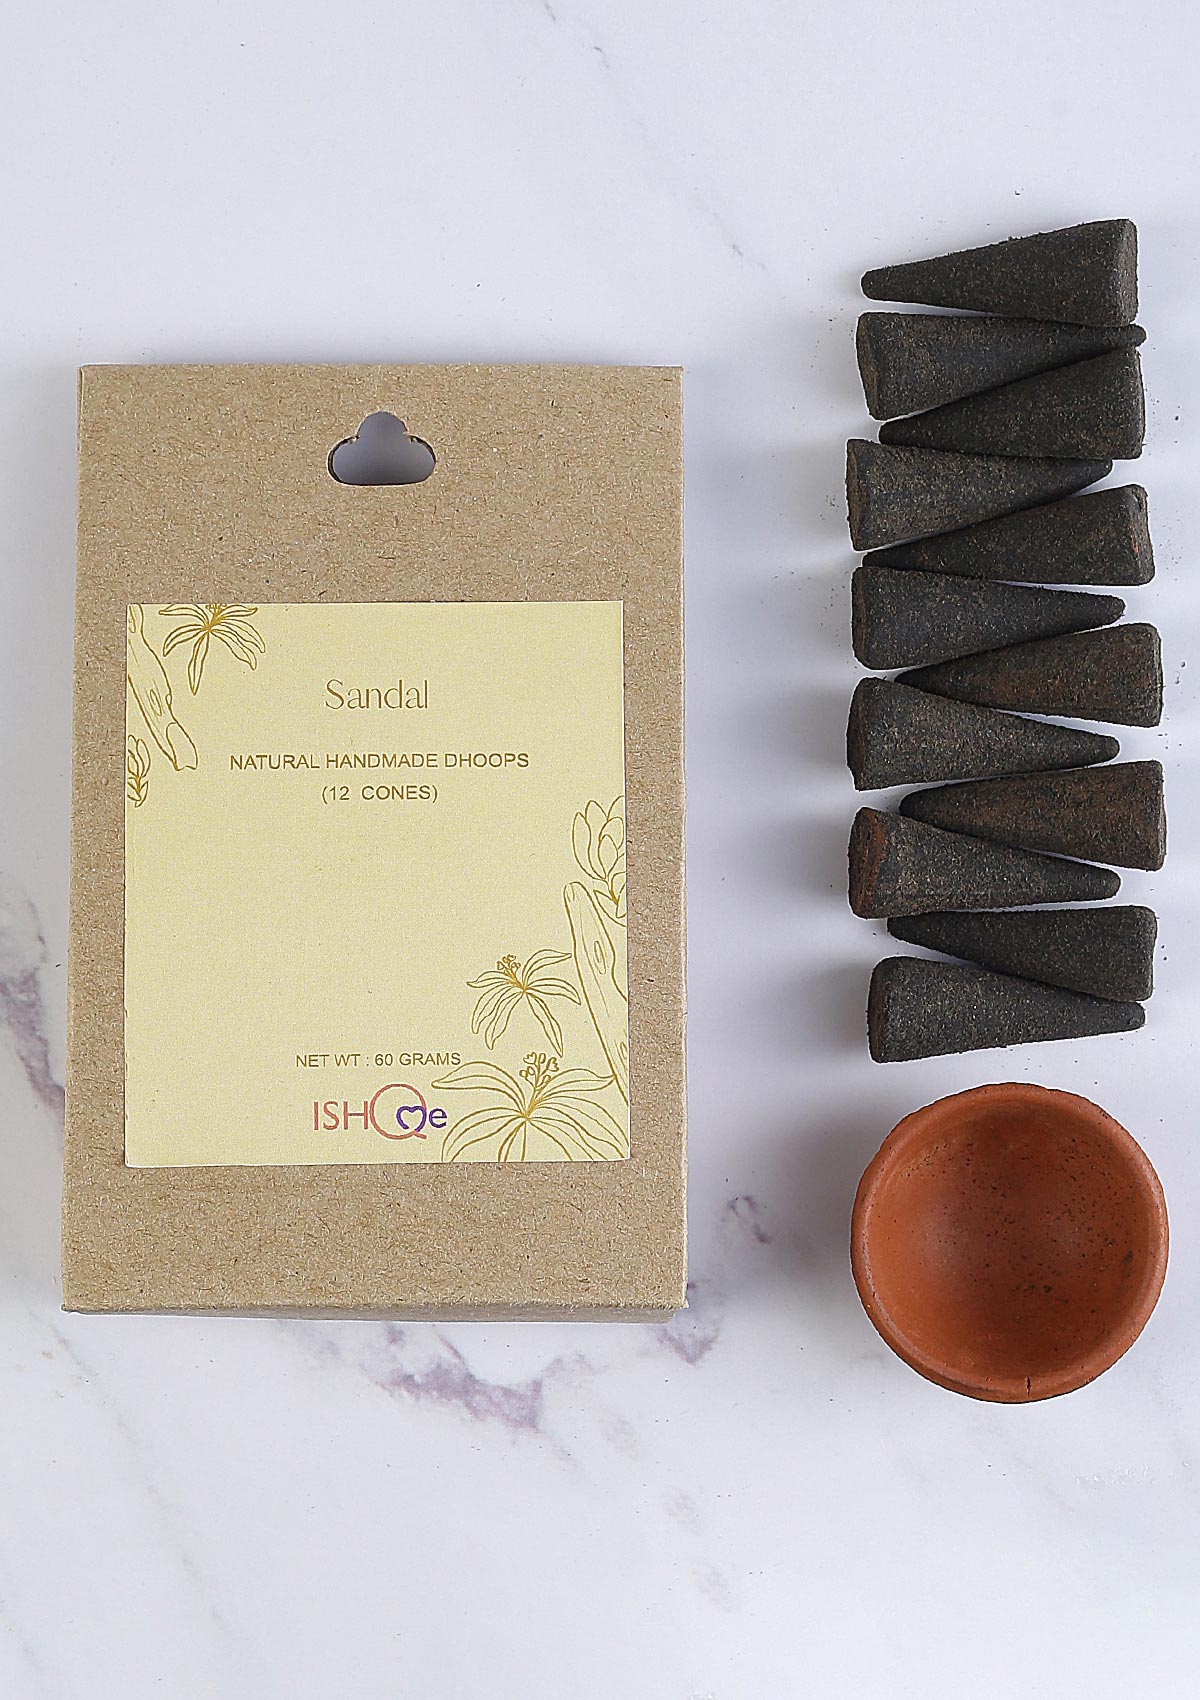 Scented Harmony: IshqMe's Sandal & Musk Dhoop Cones with Artistic Deep Blue Stand